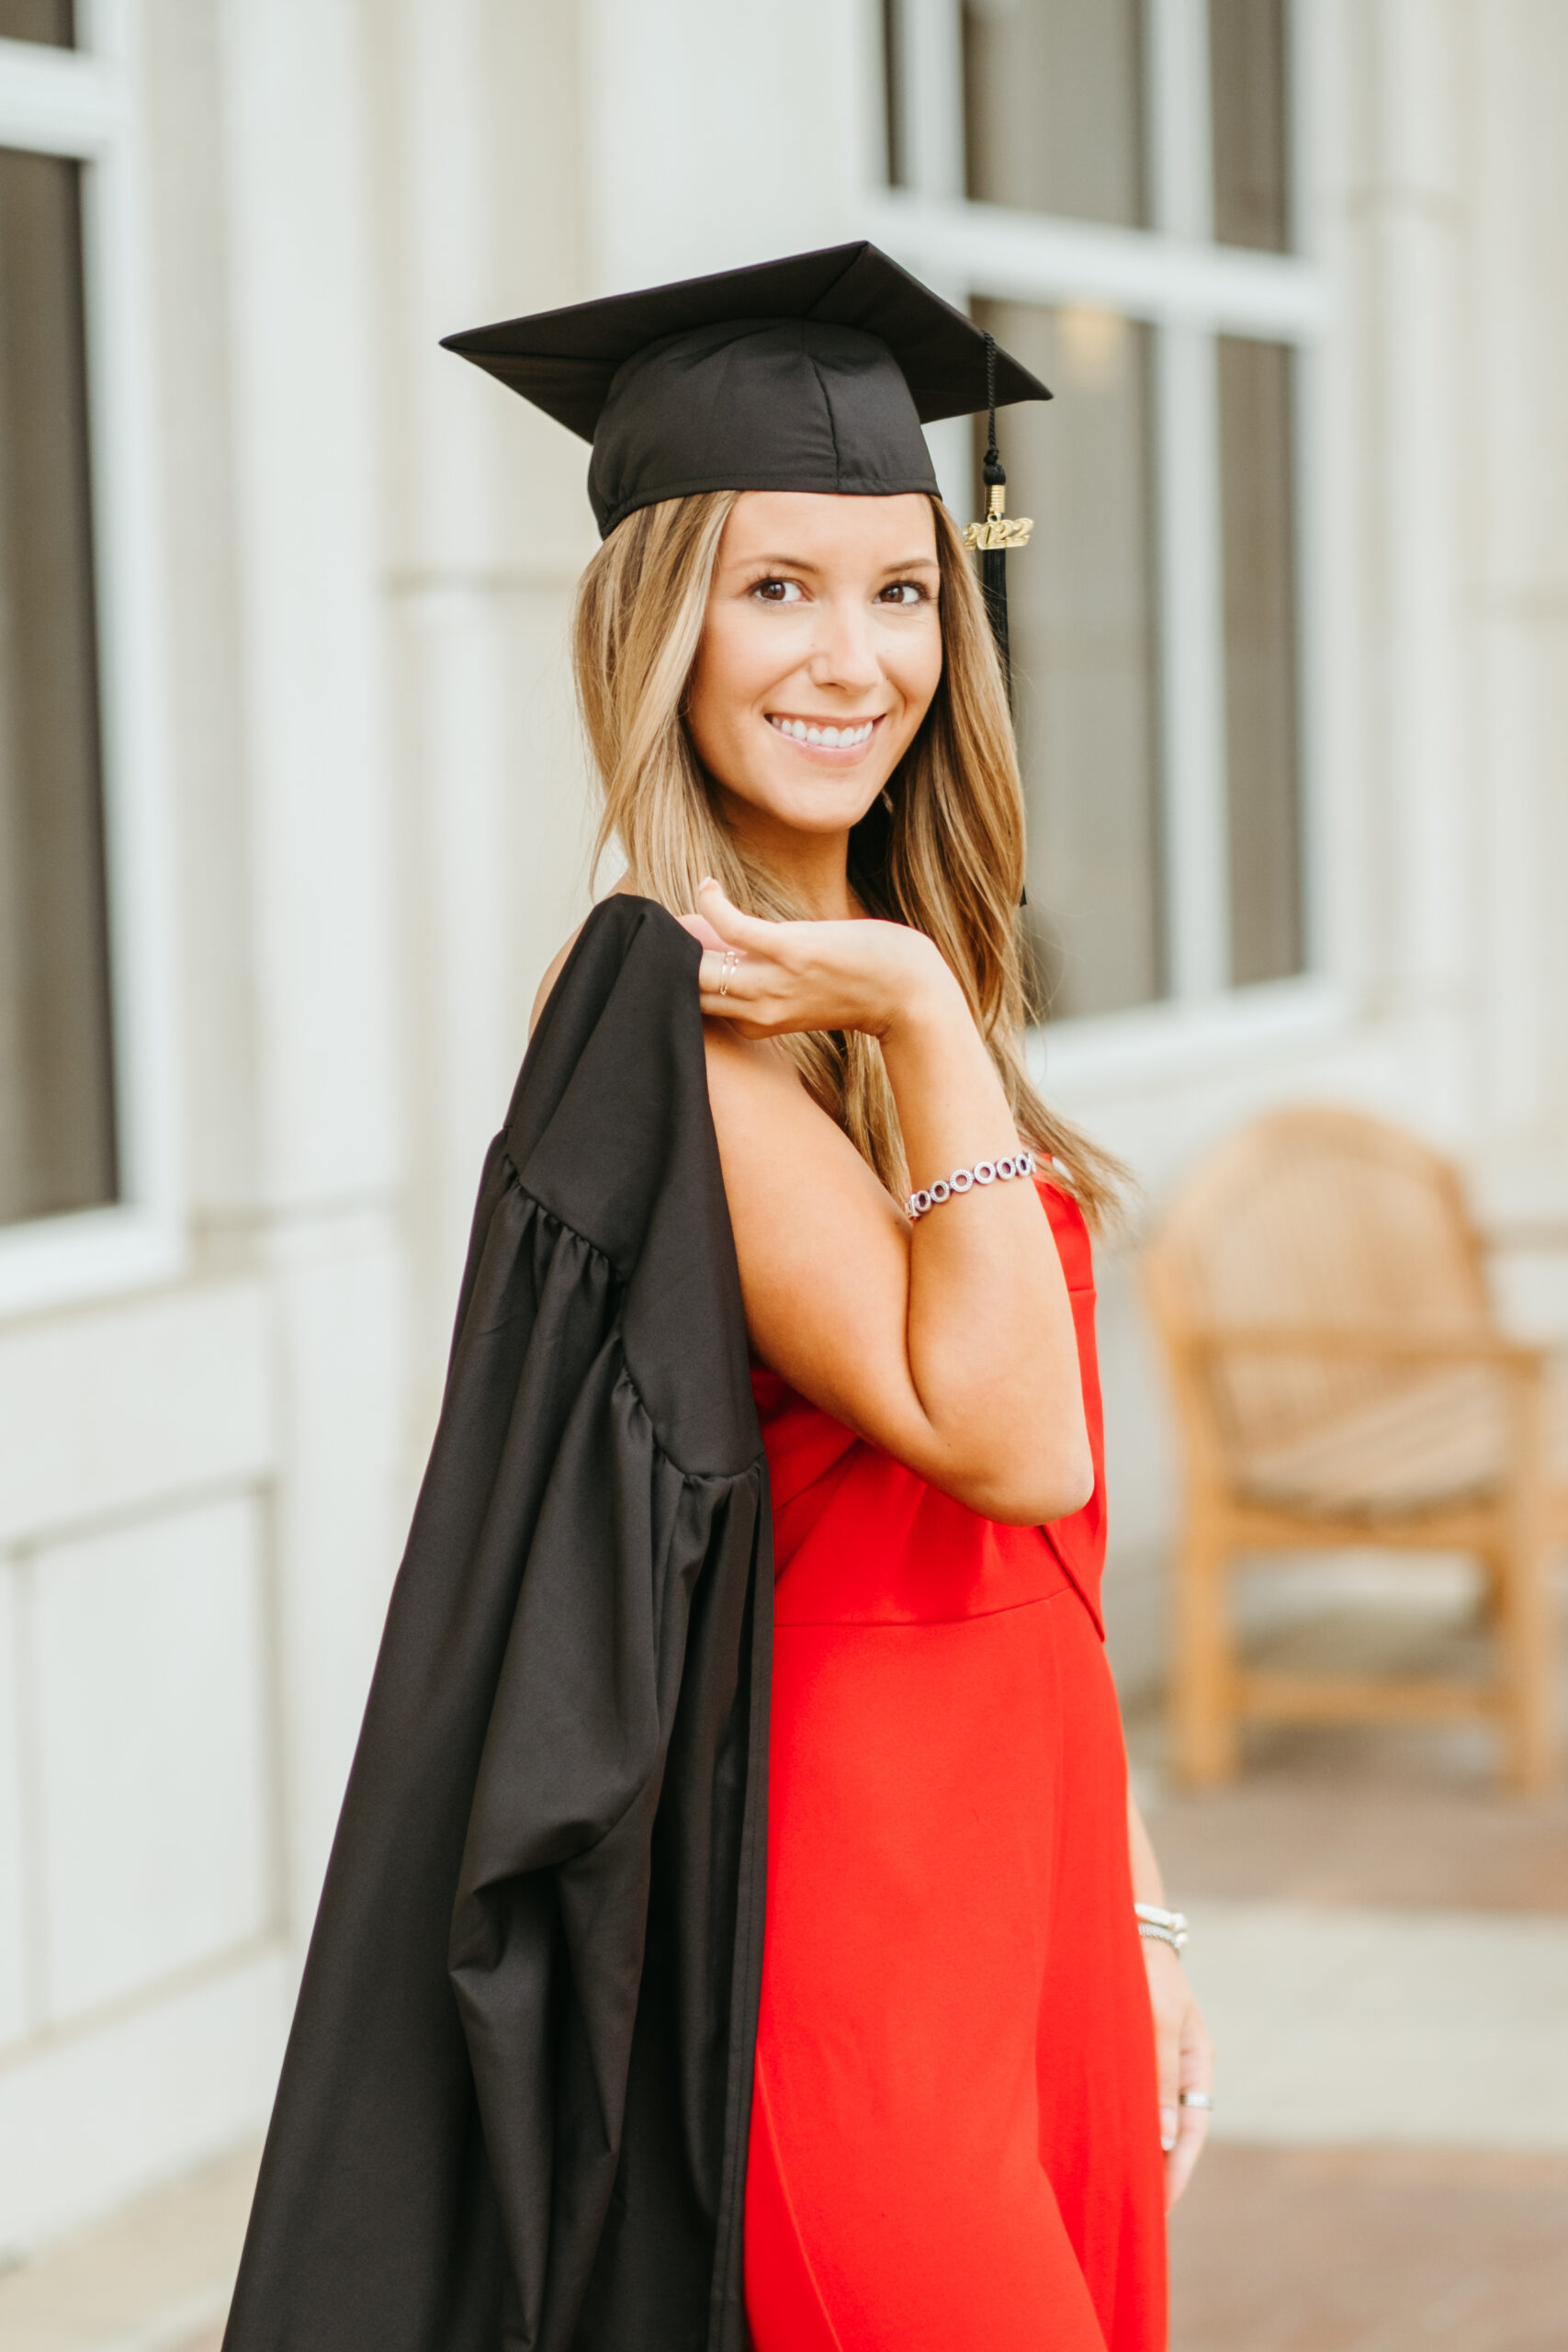 NWA Senior in cap and gown photos at the University of Arkansas campus.